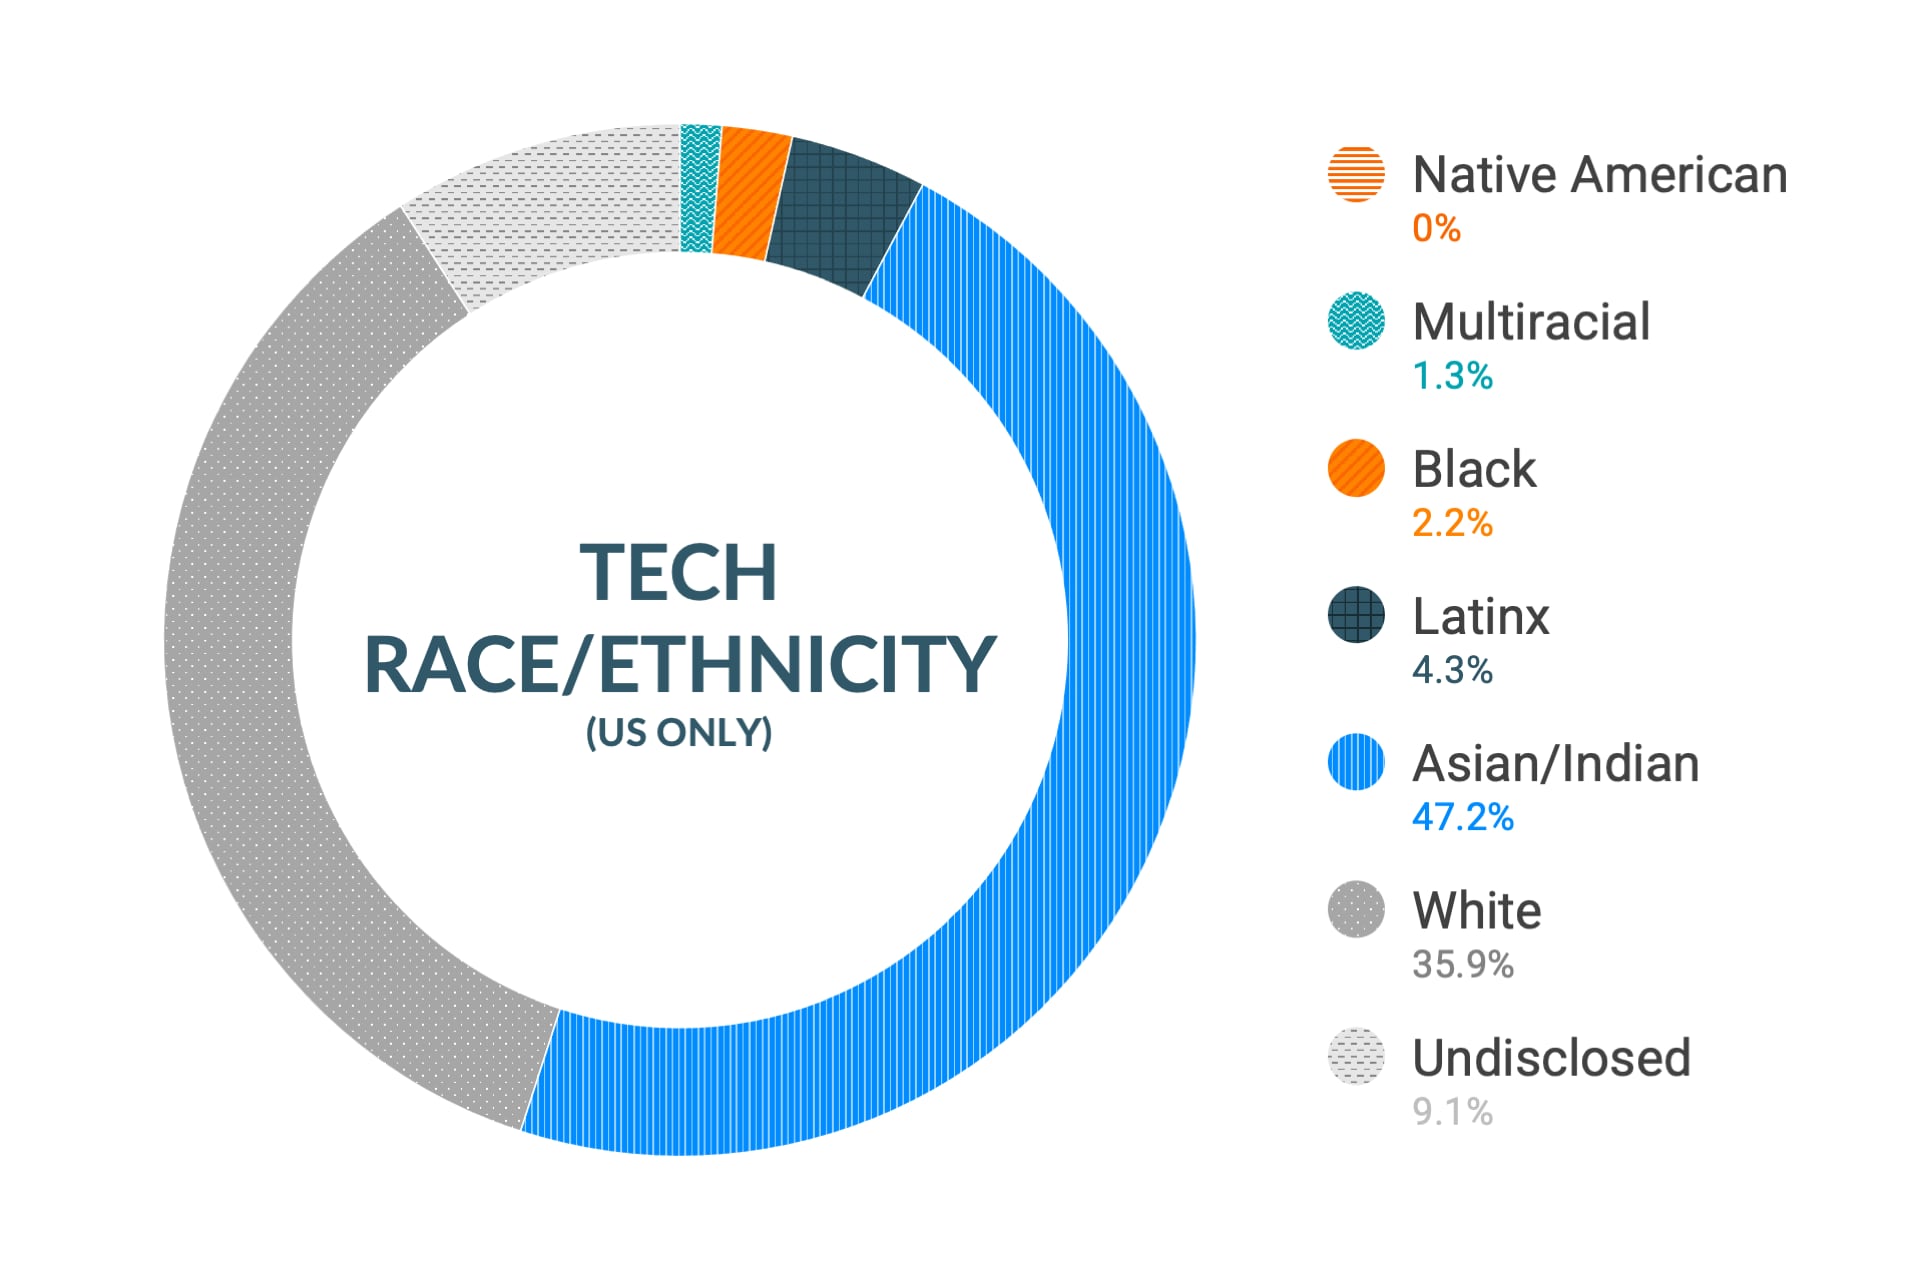 Cloudera Diversity and Inclusion data for Race and Ethnicity in U.S. Technical and Engineering Roles: Native American 0%, Multiracial 1.3%, Black 2.2%, Latinx 4.3%, Asian and Indian 47.2%, White 35.9%, Undisclosed 9.1%